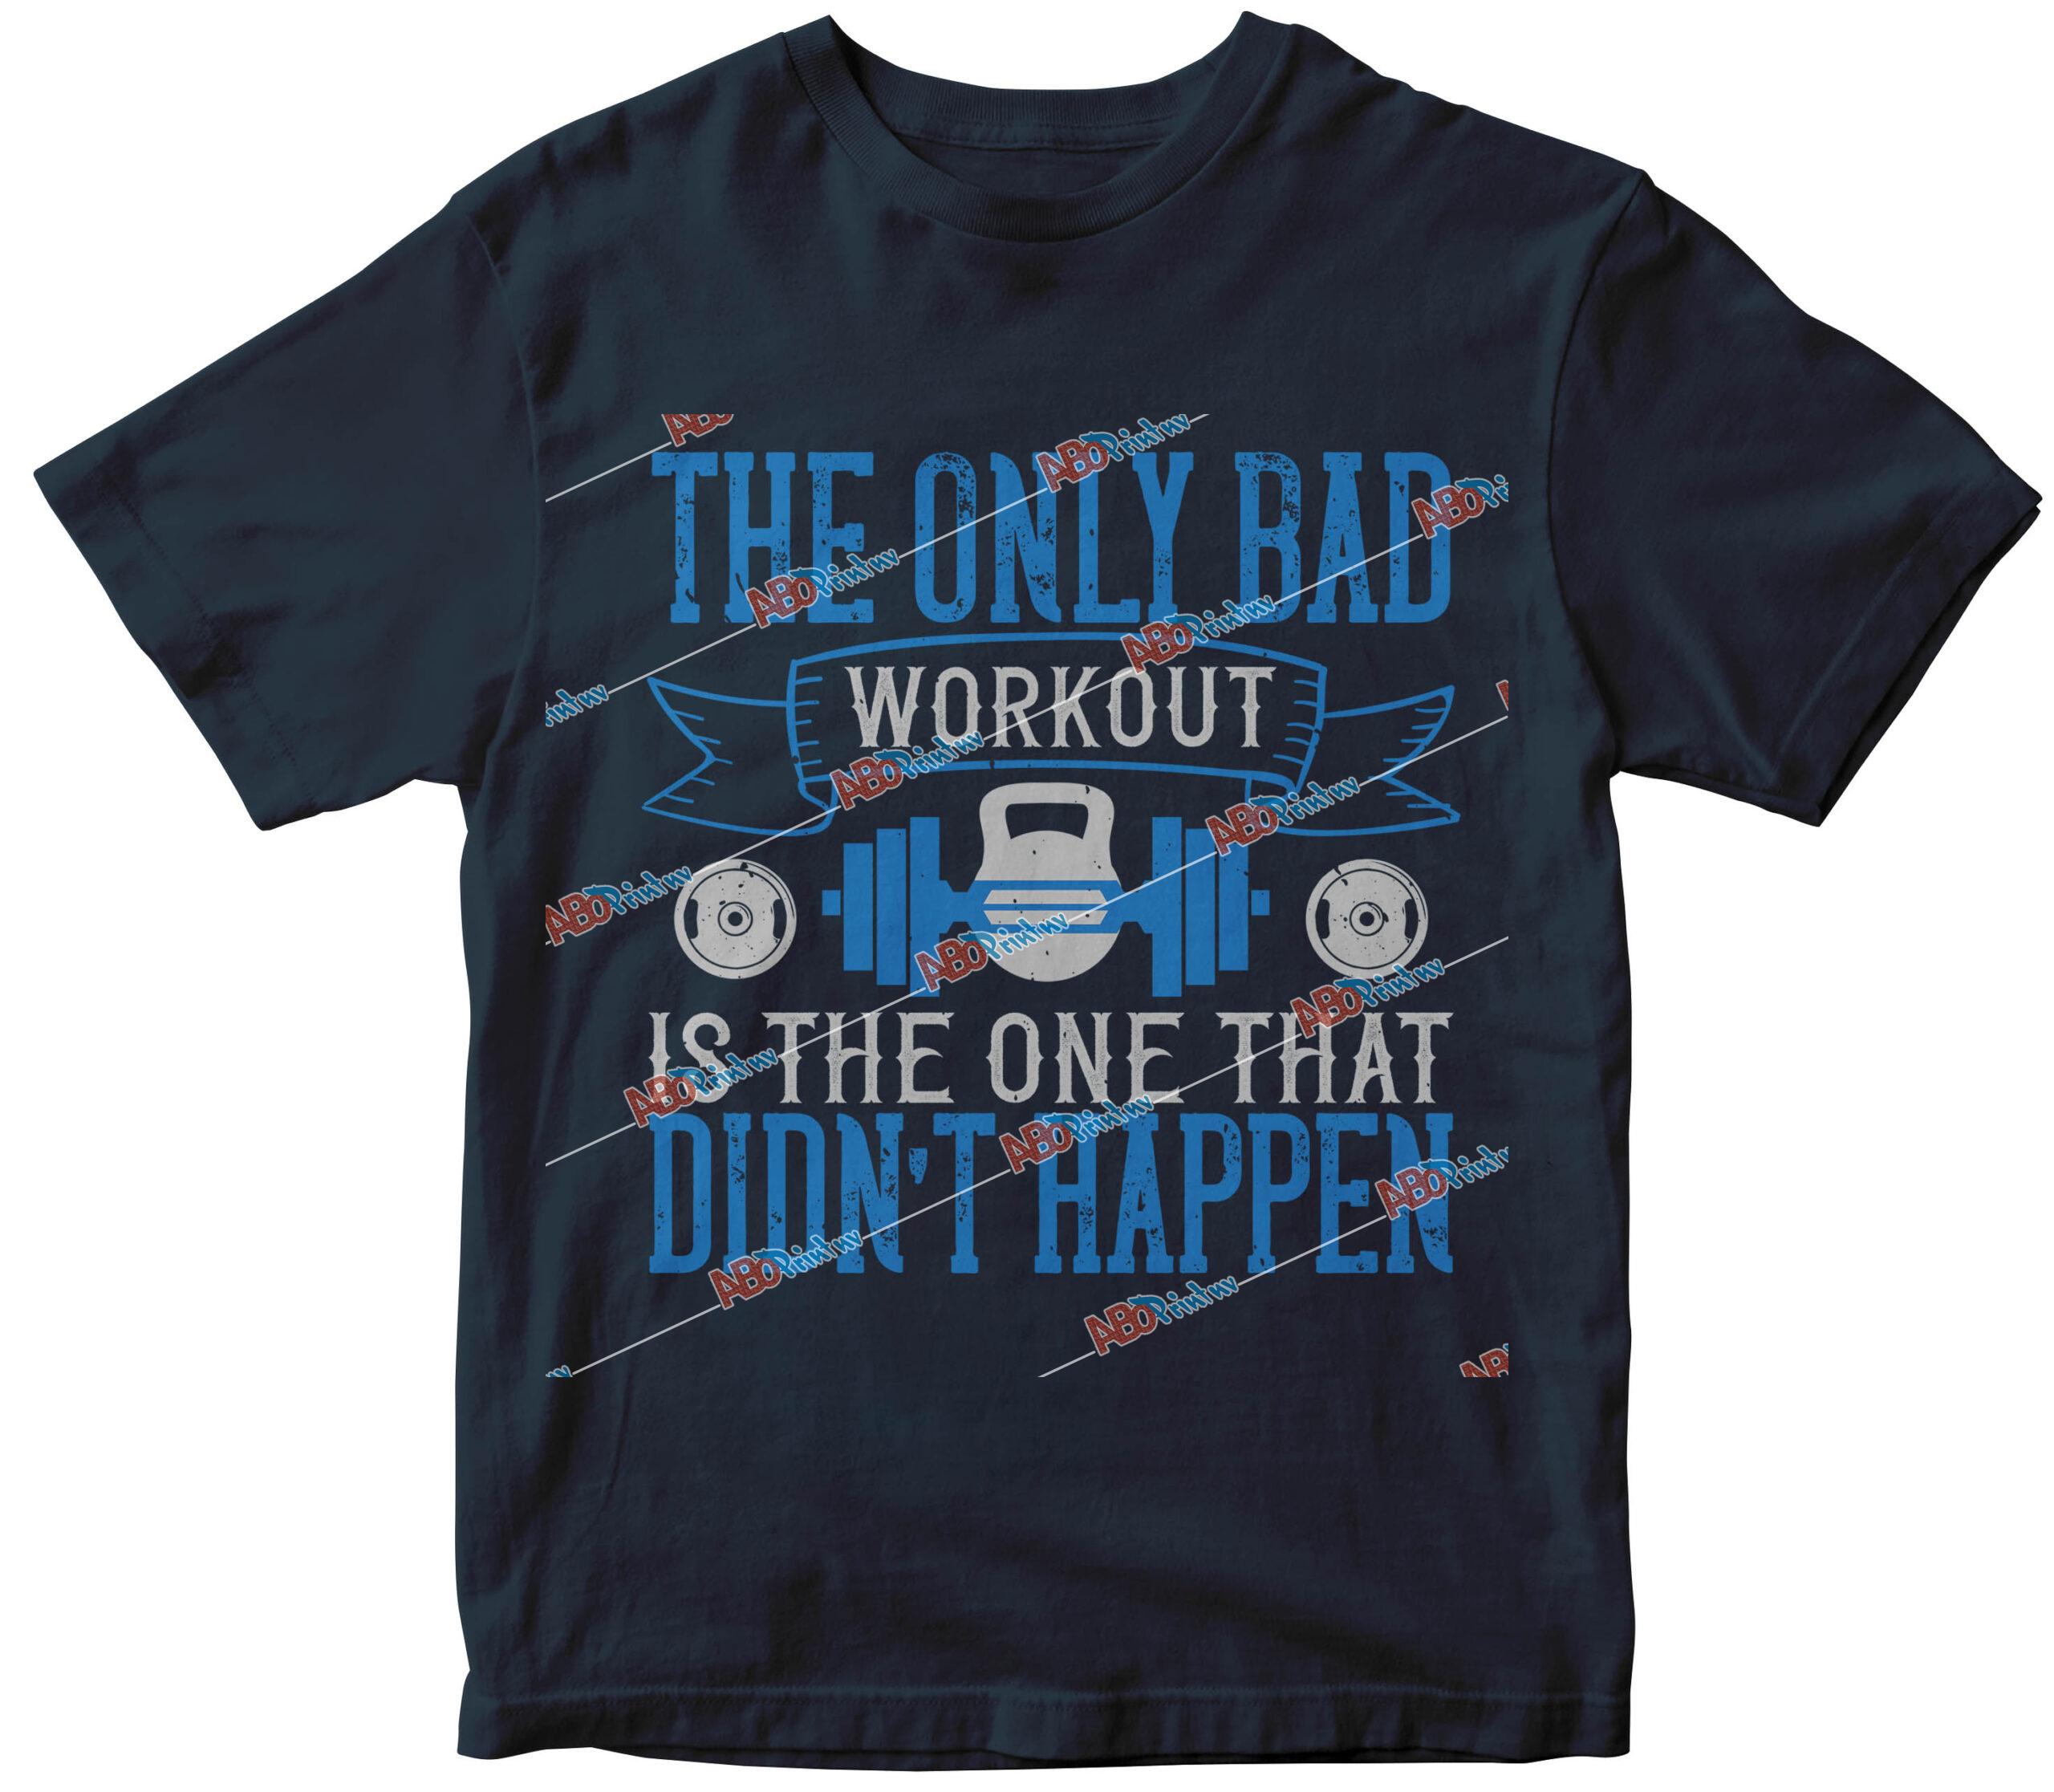 The only bad workout is the one that didnÔÇÖt happen.jpg